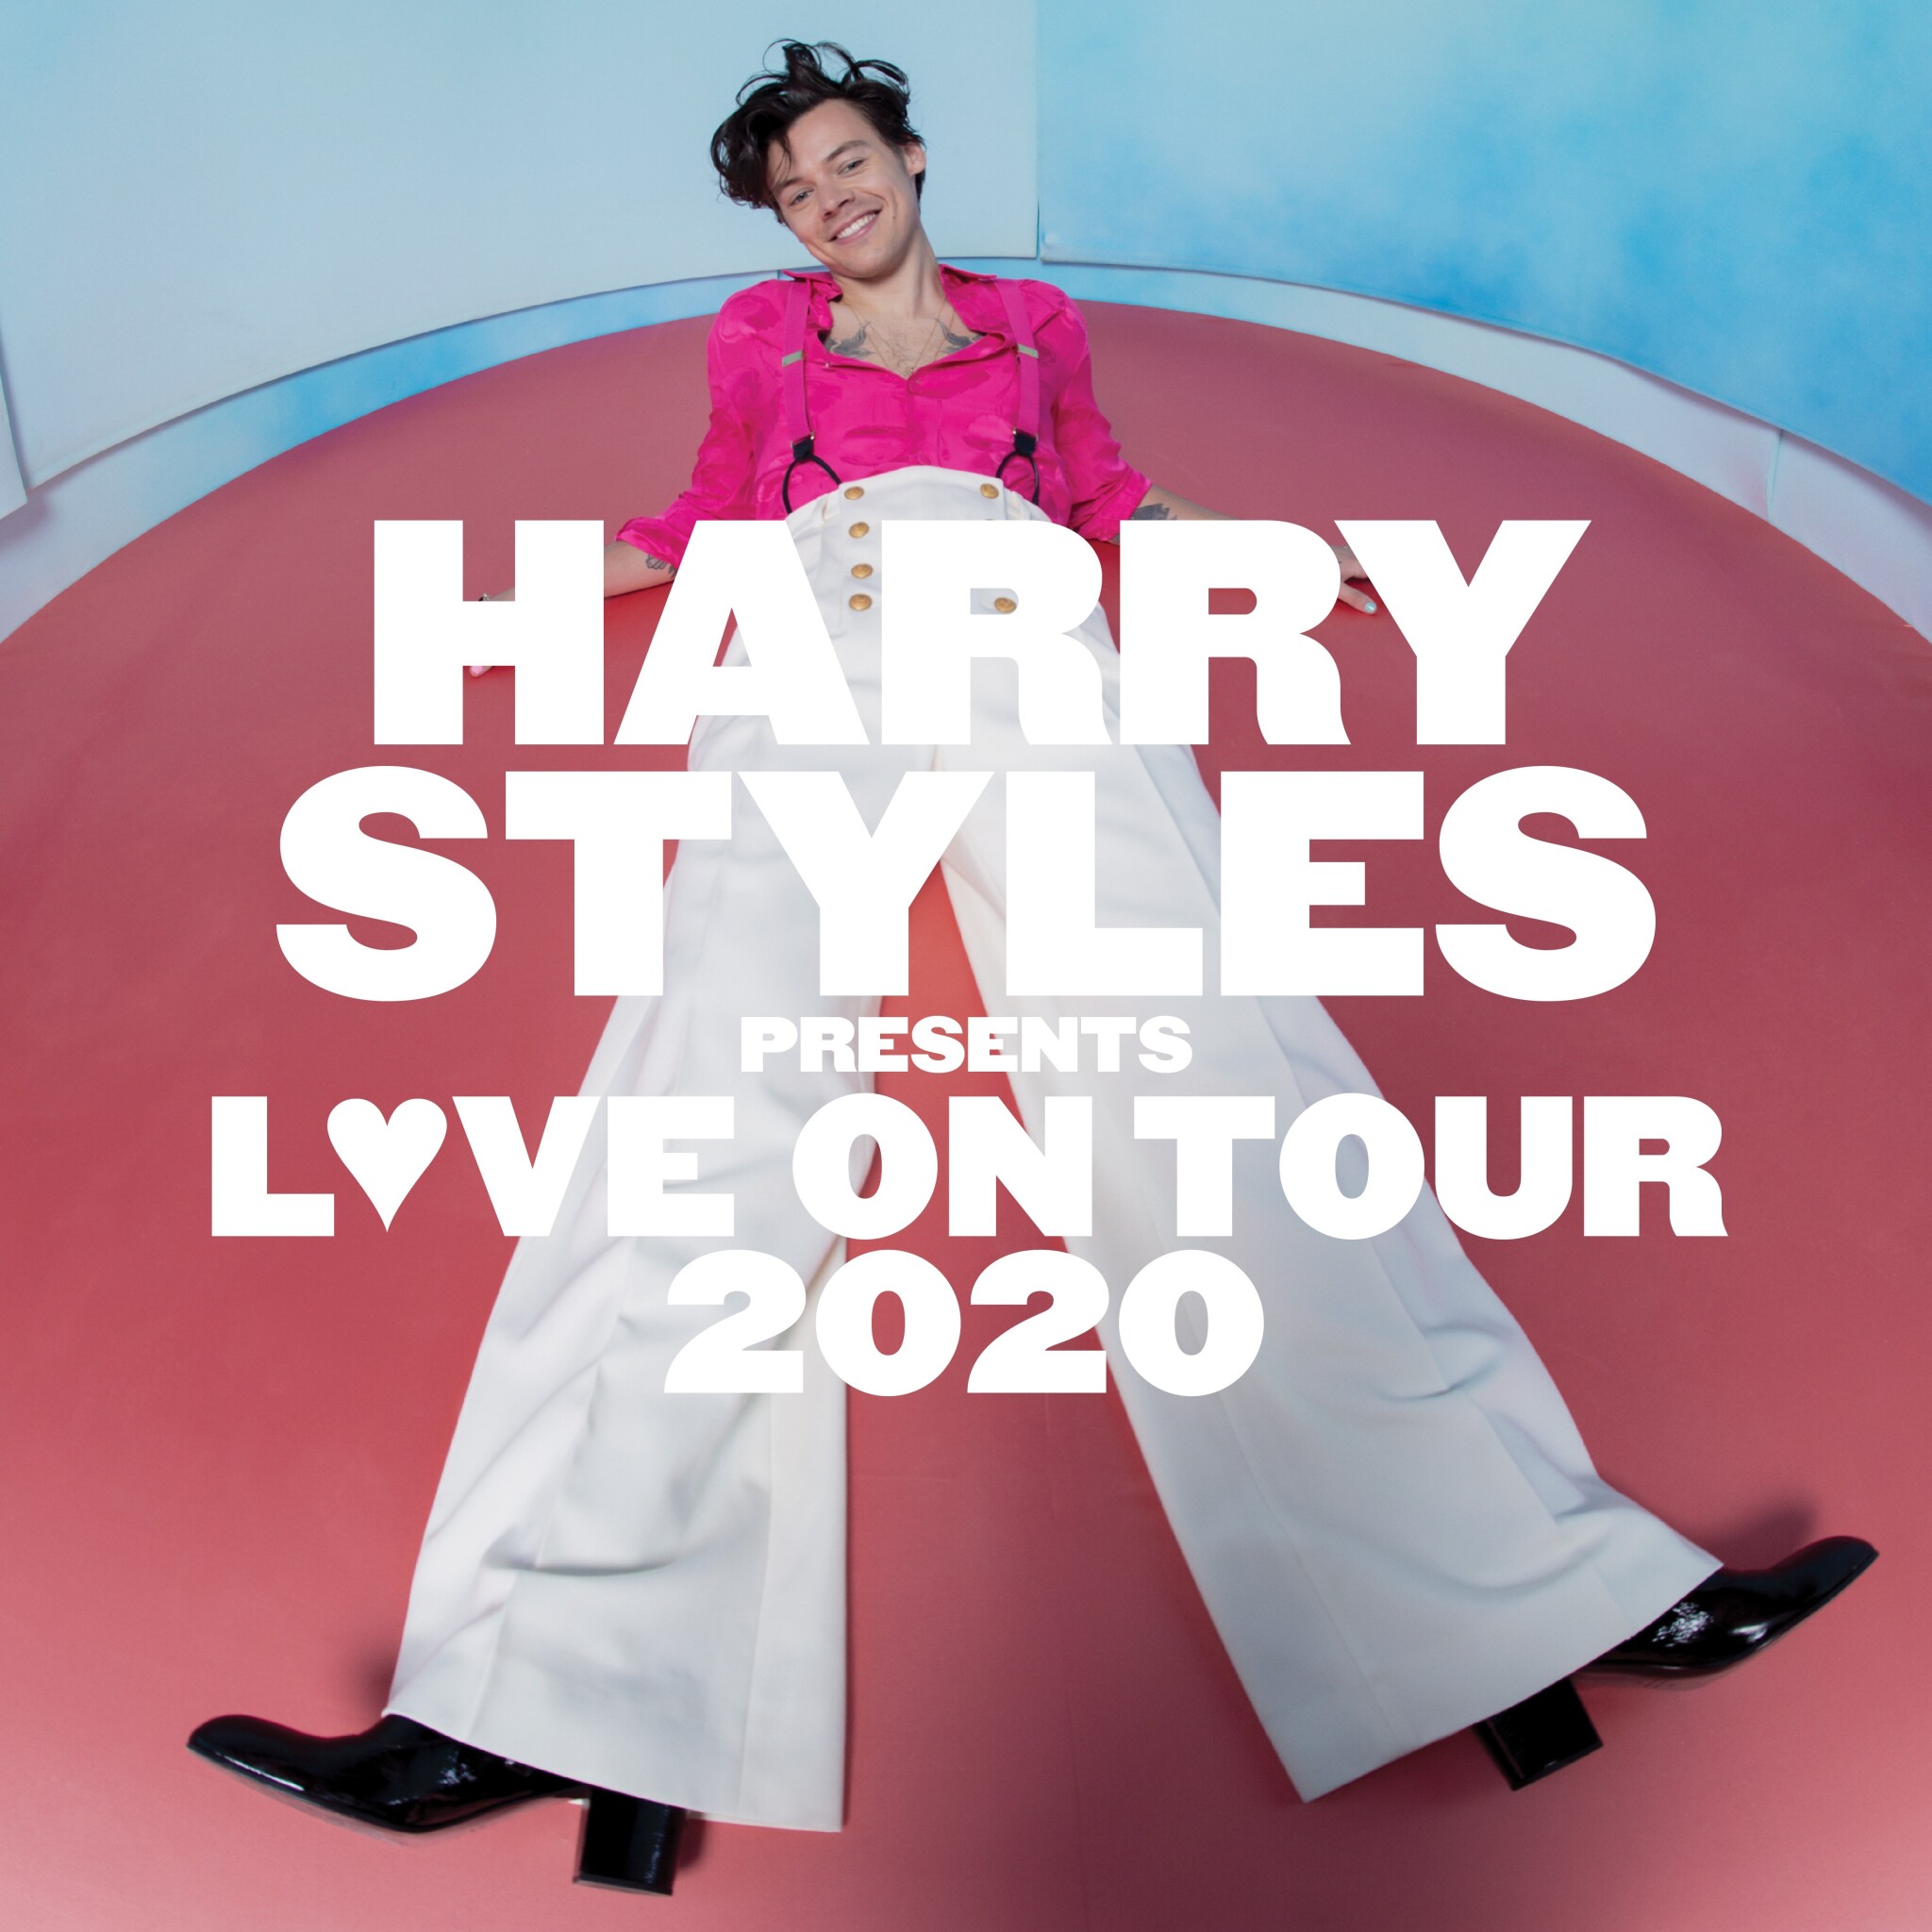 harry styles extended tour